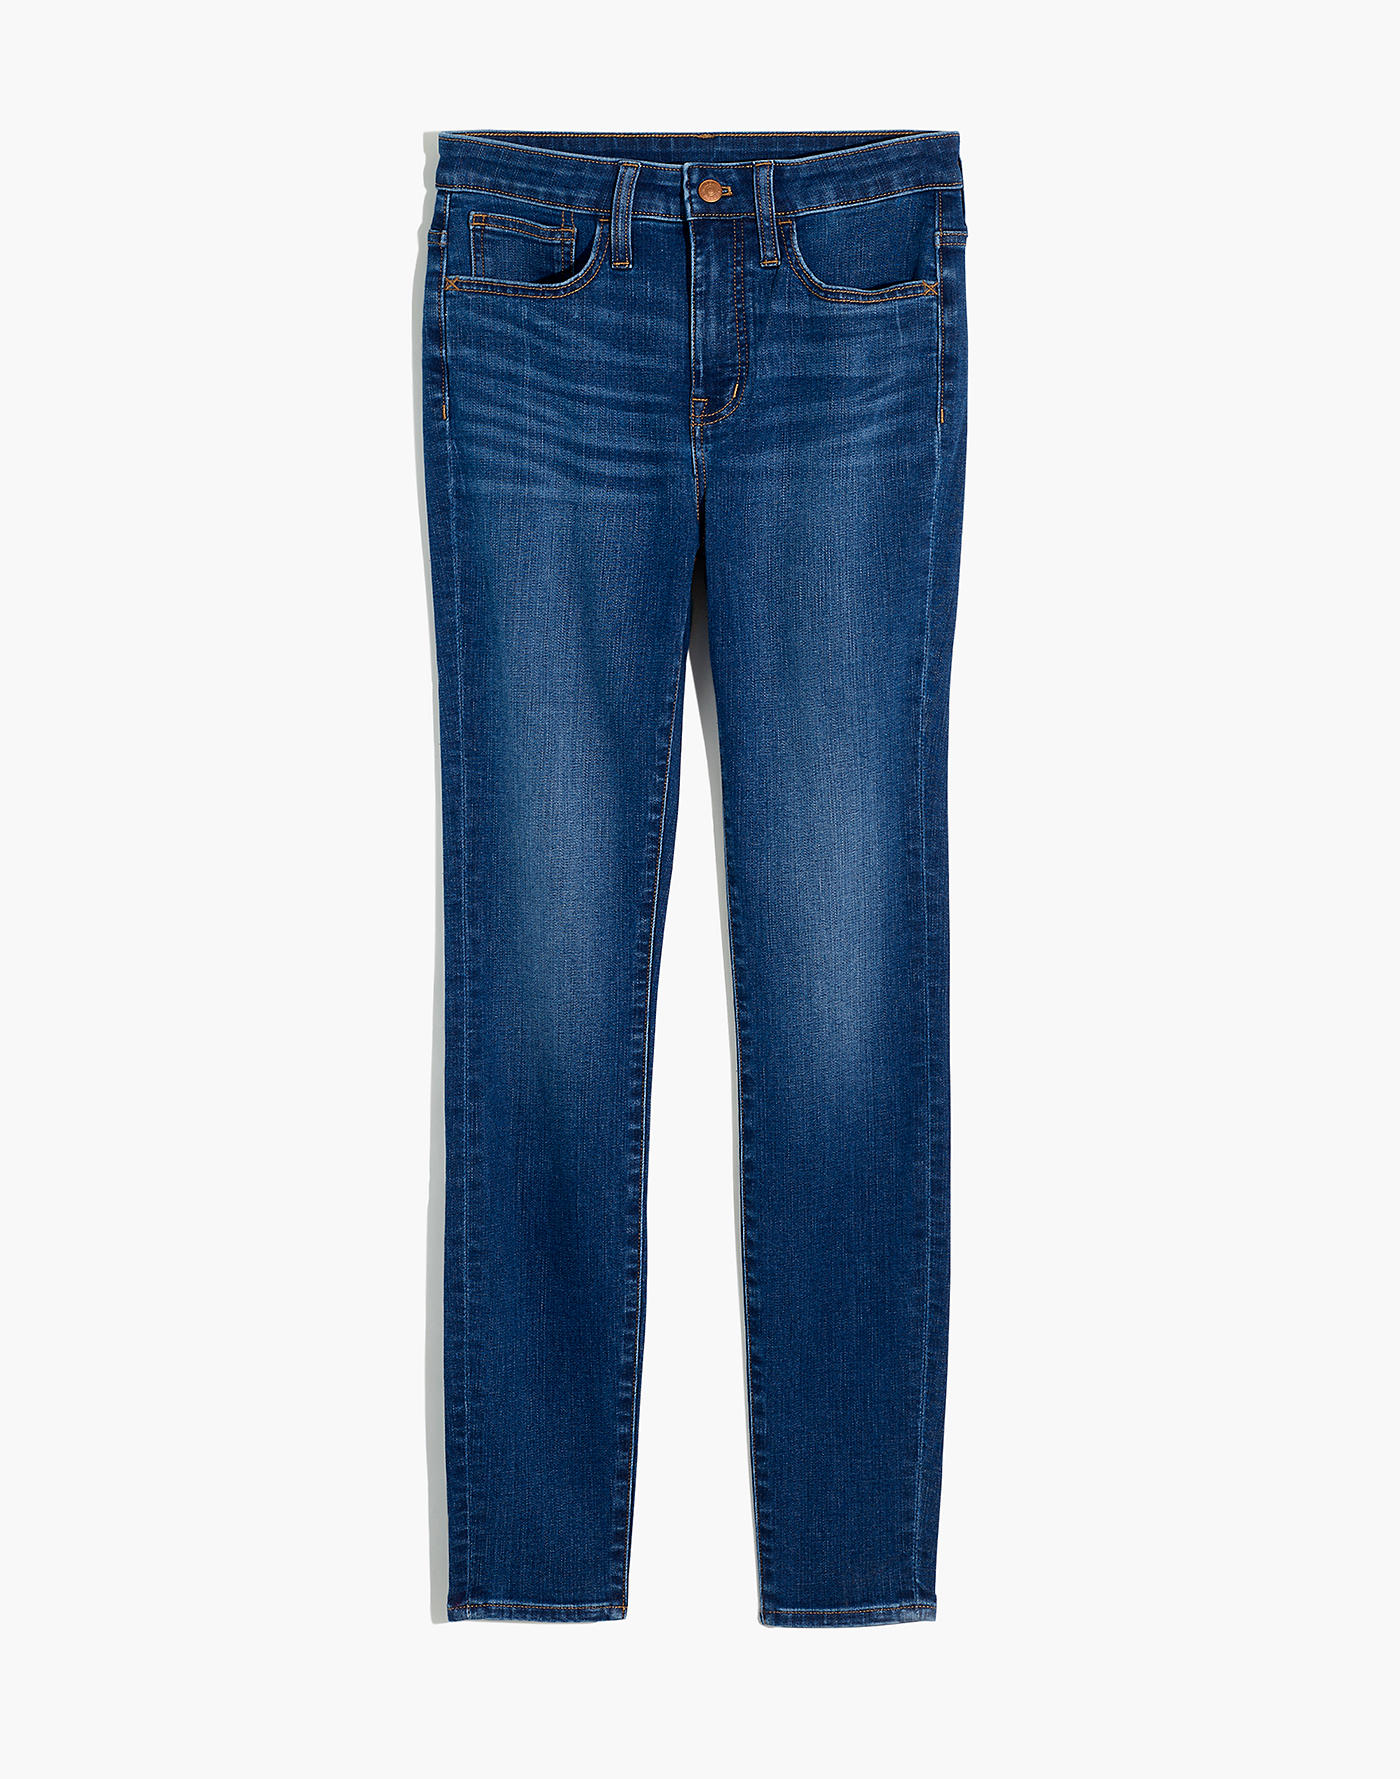 Madewell Roadtripper Jeans | Recent Finds, 4/17 | Kelly in the City